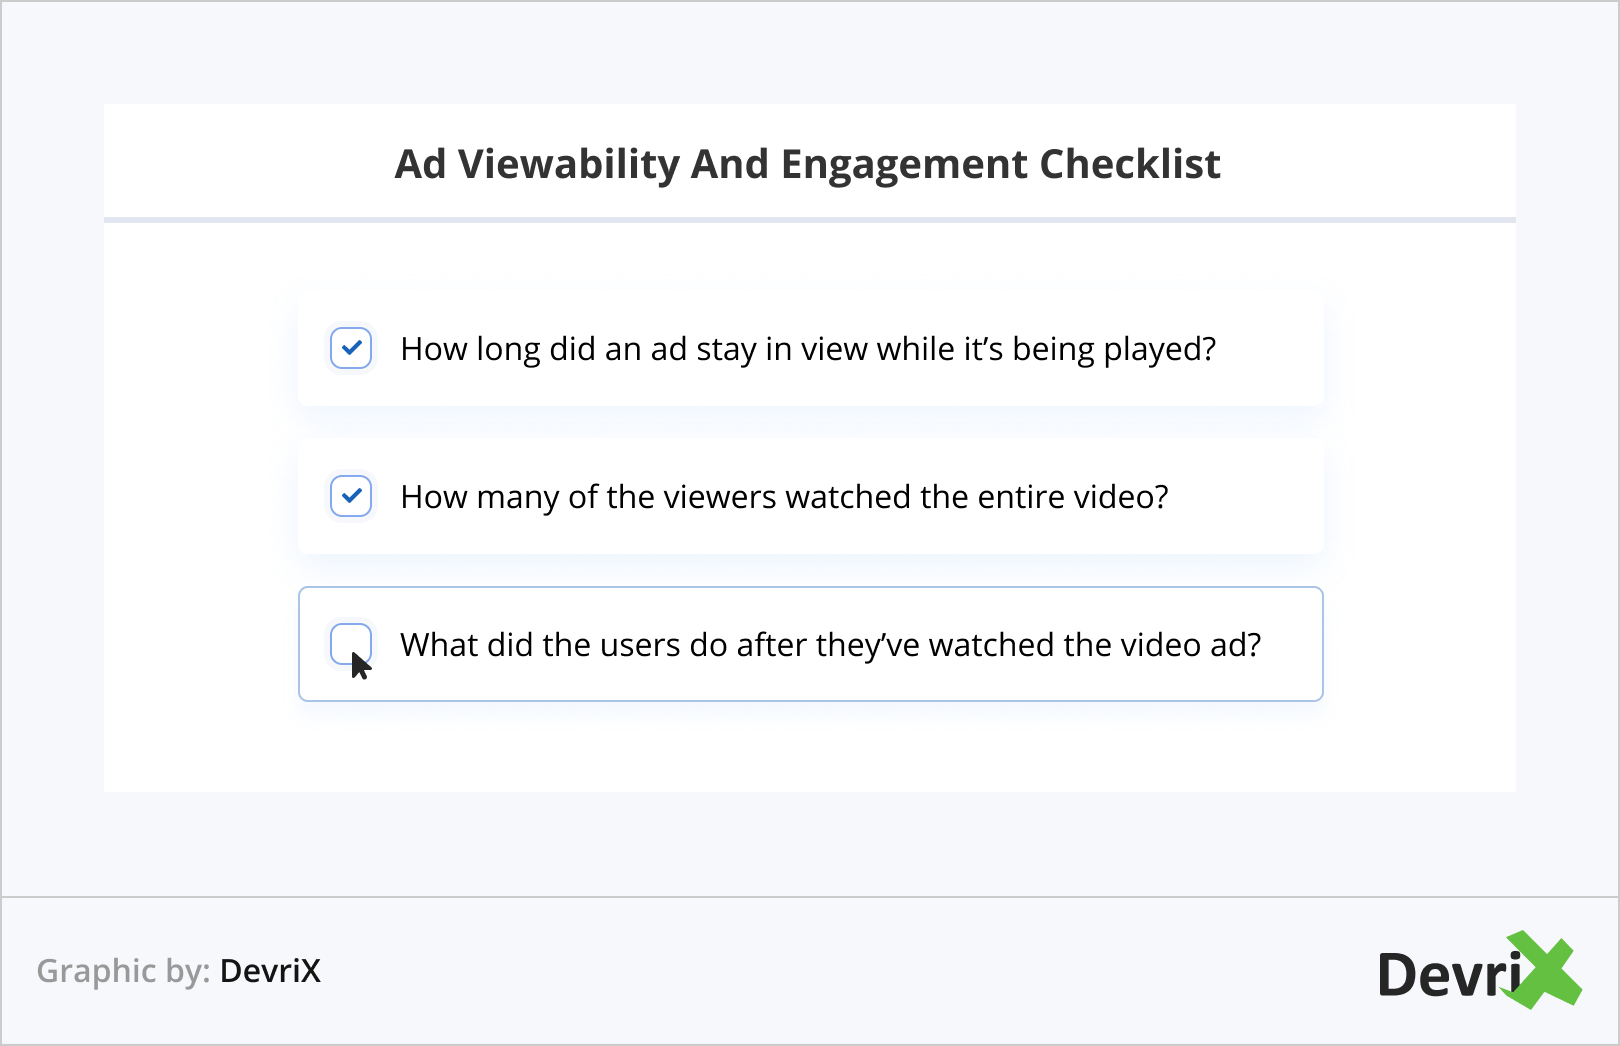 Ad Viewability And Engagement Checklist